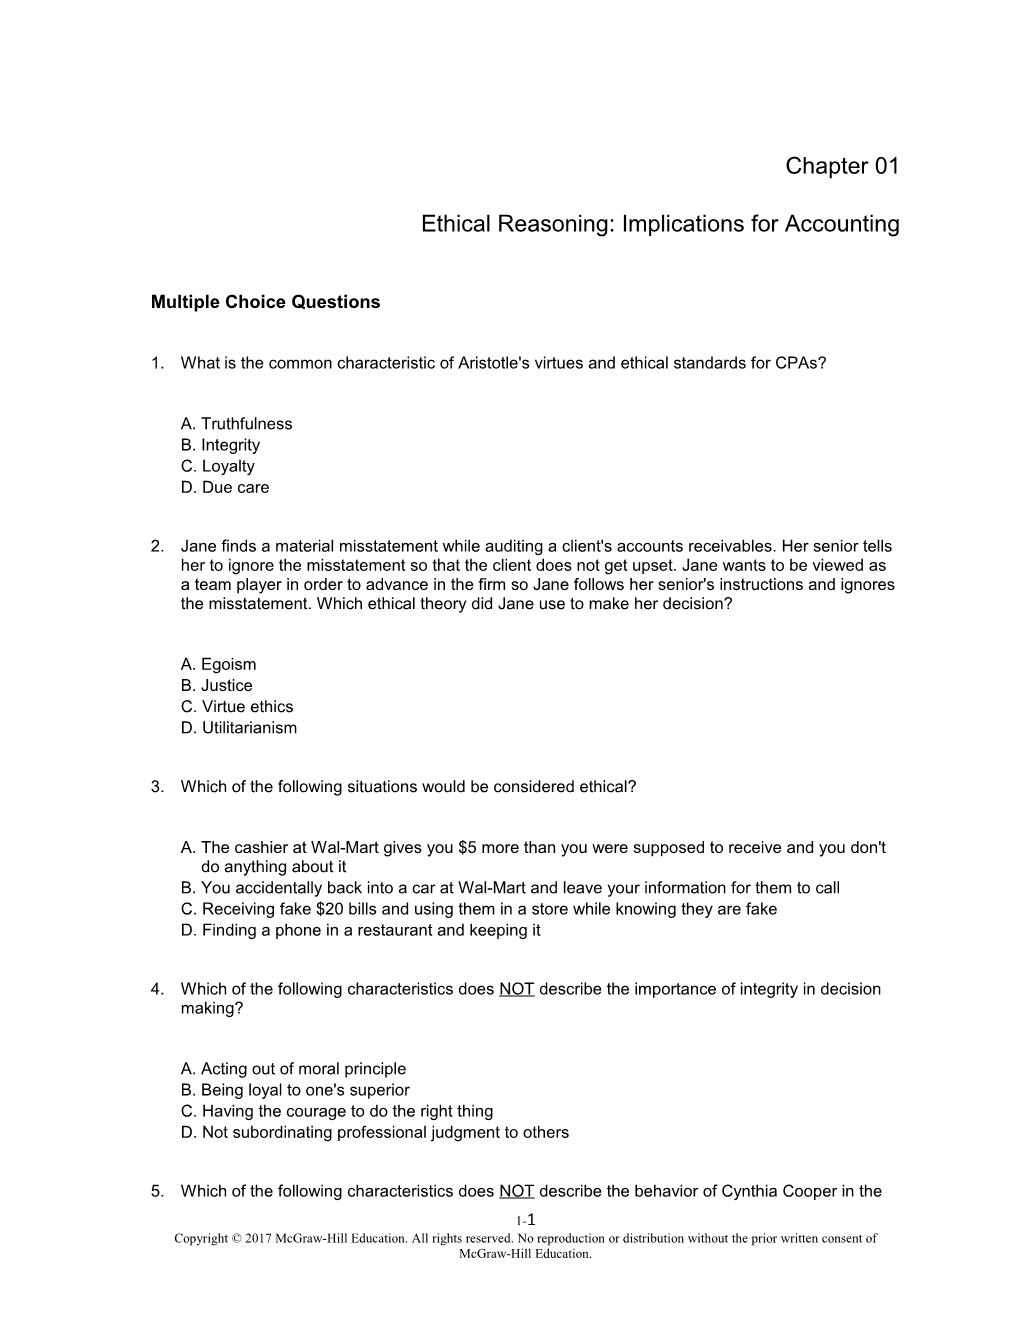 Ethical Reasoning: Implications for Accounting